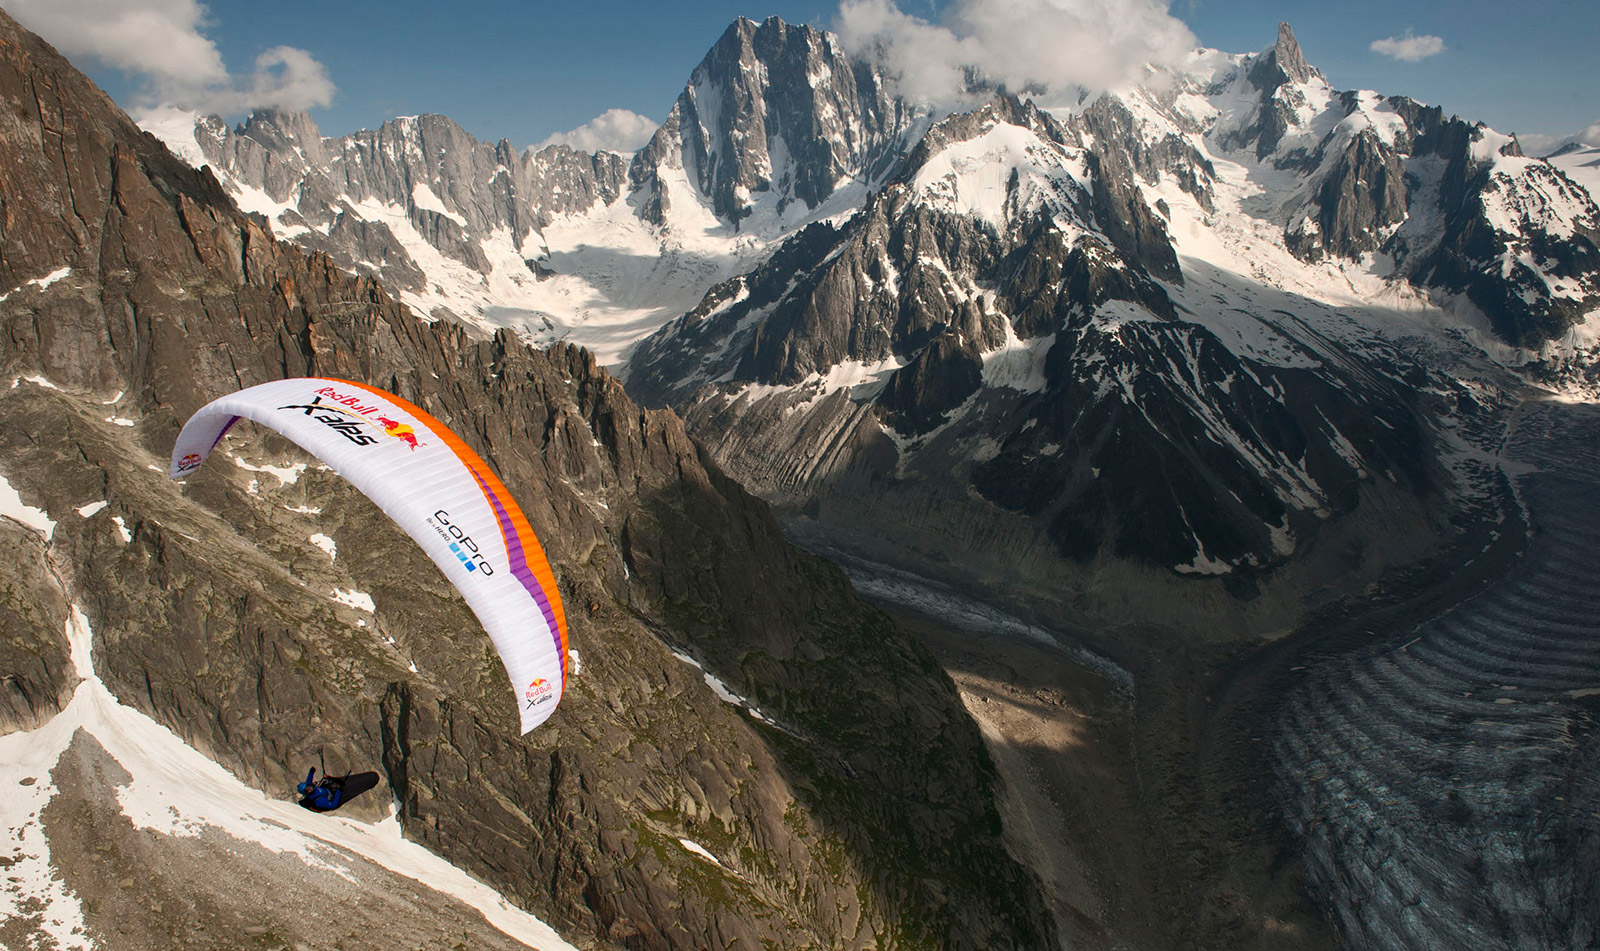 Red Bull X-Alps Paragliding